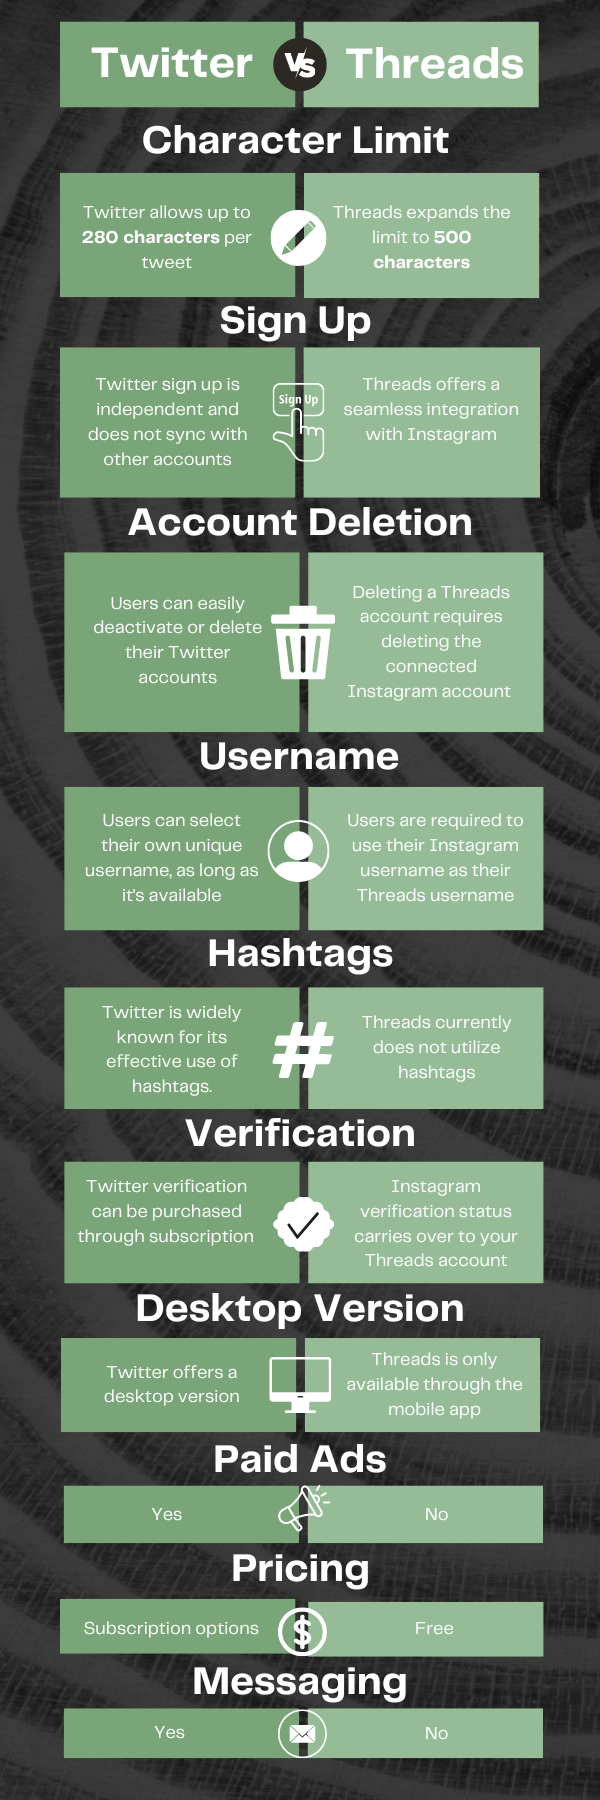 Threads vs Twitter Infographic for Marketers